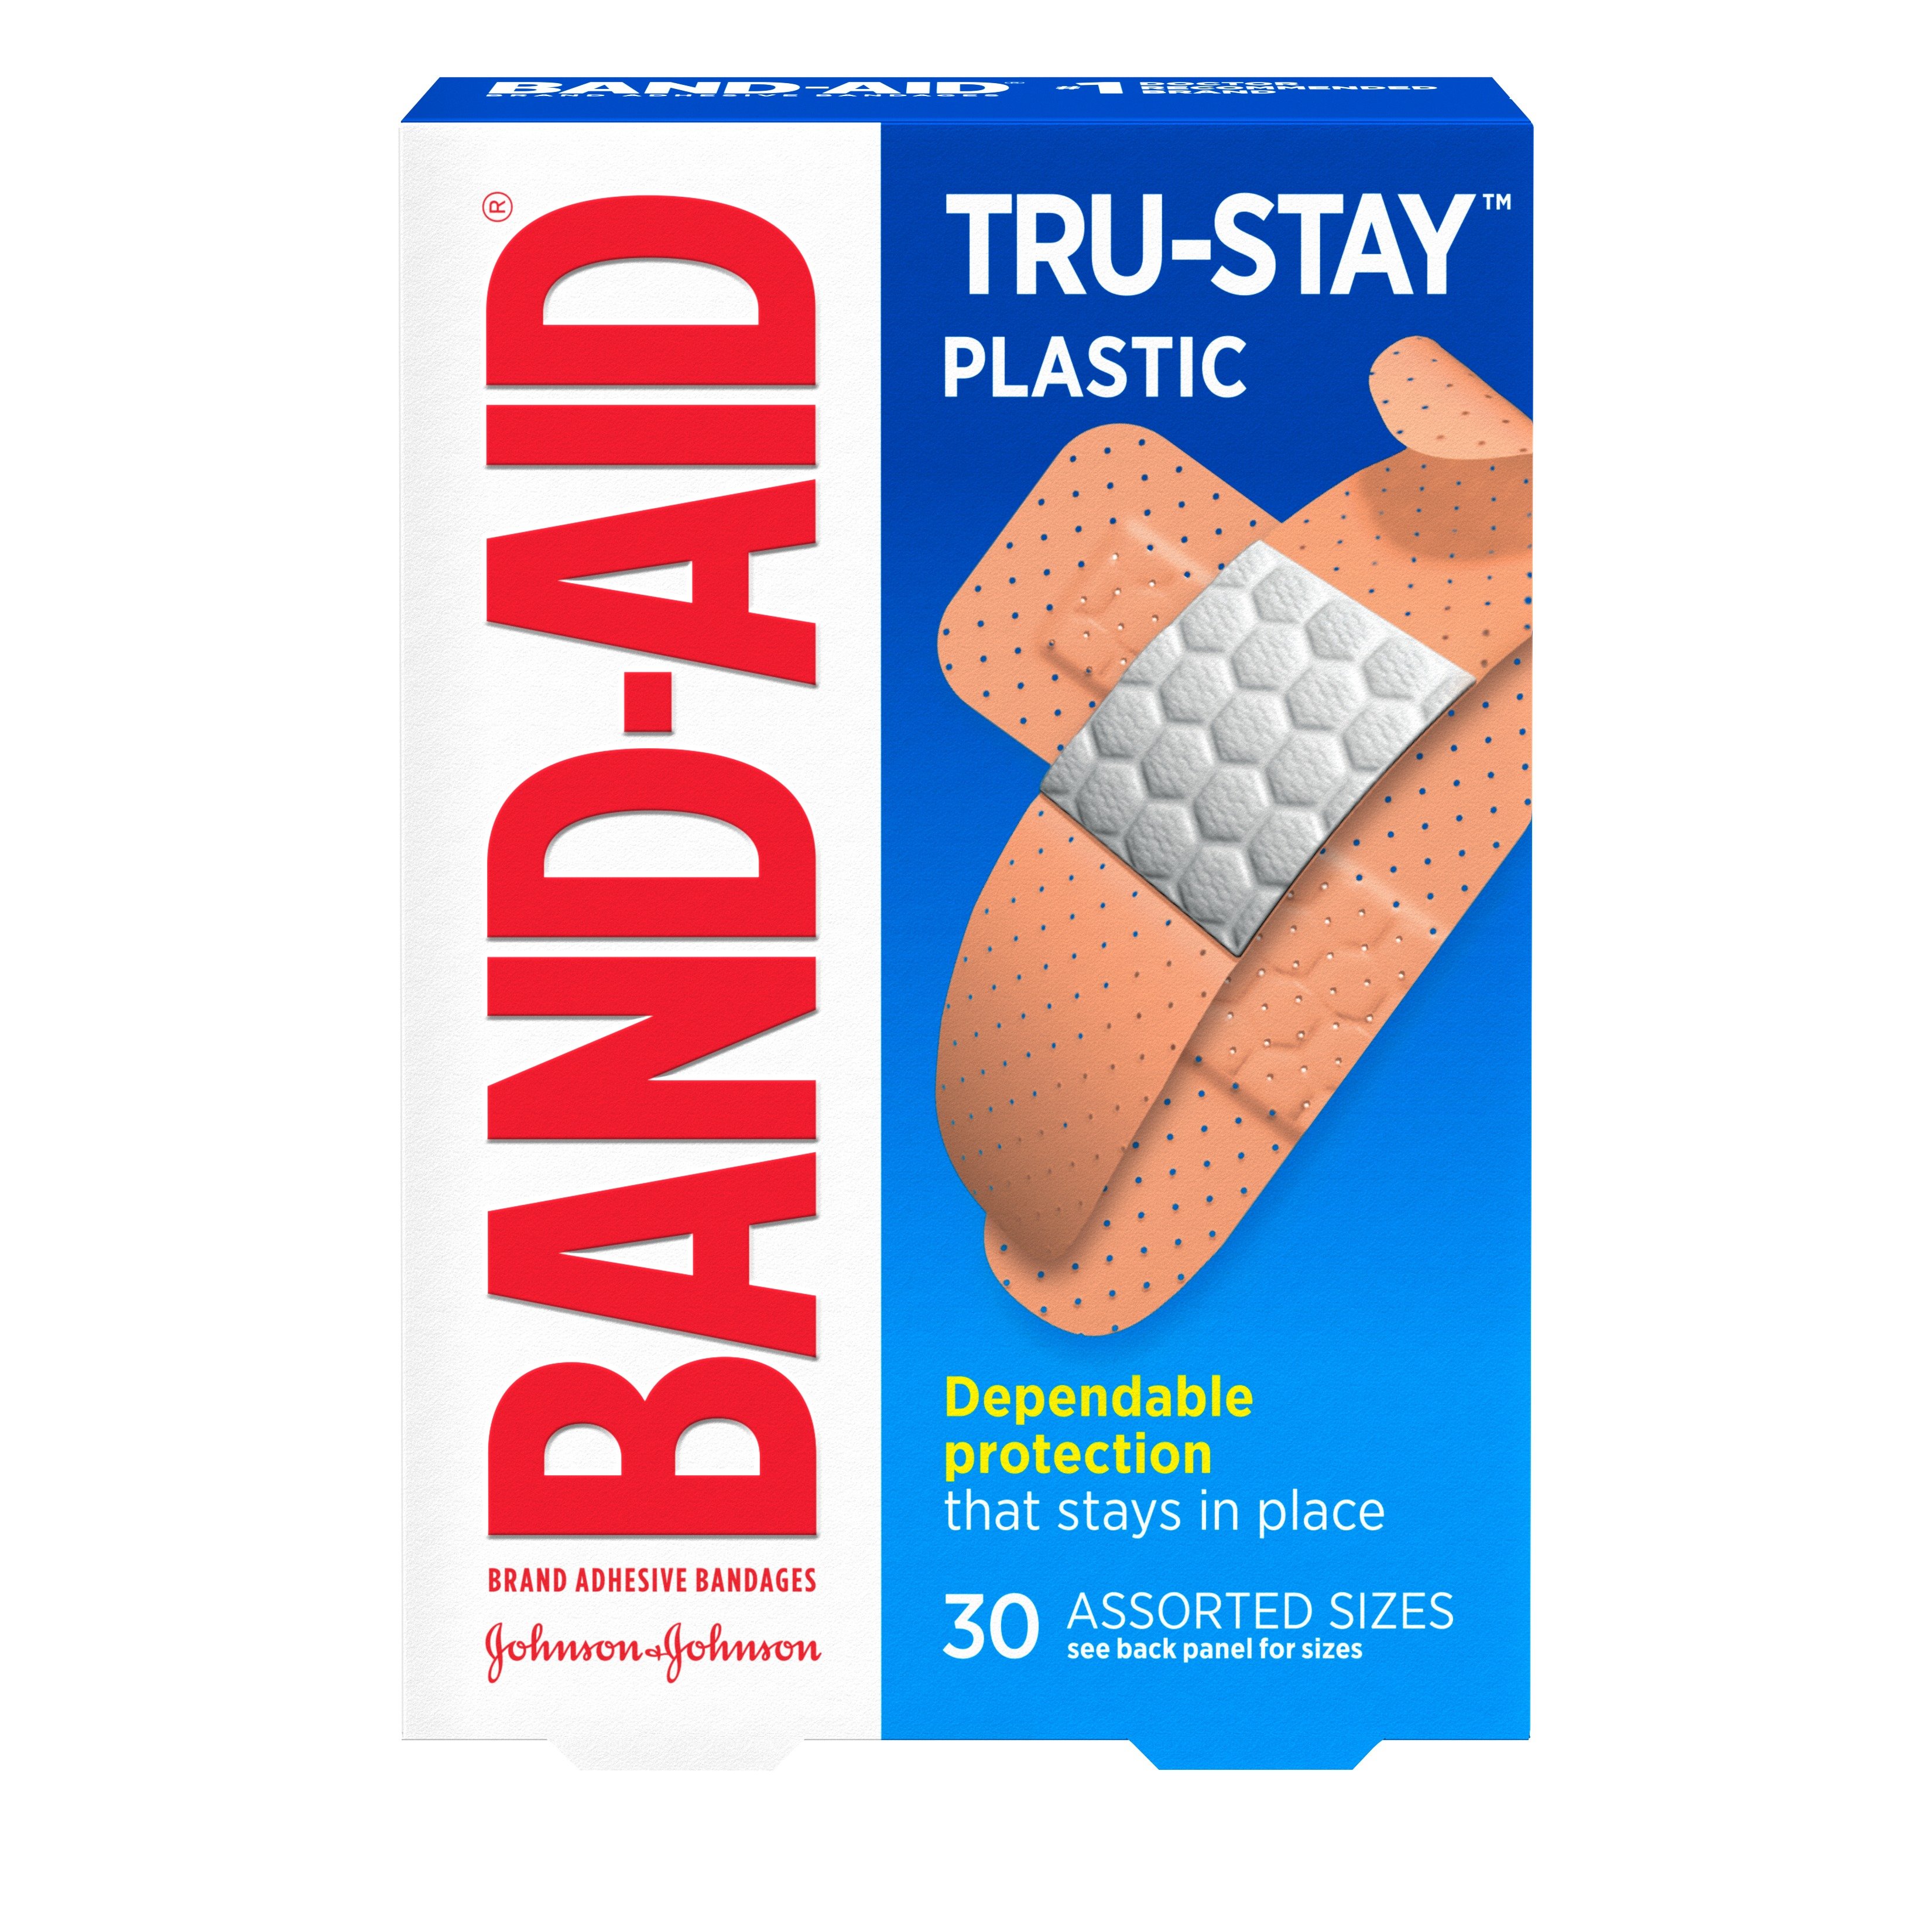 https://www.band-aid.com/sites/bandaid_us/files/product-images/bab_381370045311_band_aid_band_aid_tru_stay_plastic_assorted_30ct_000_1.jpeg